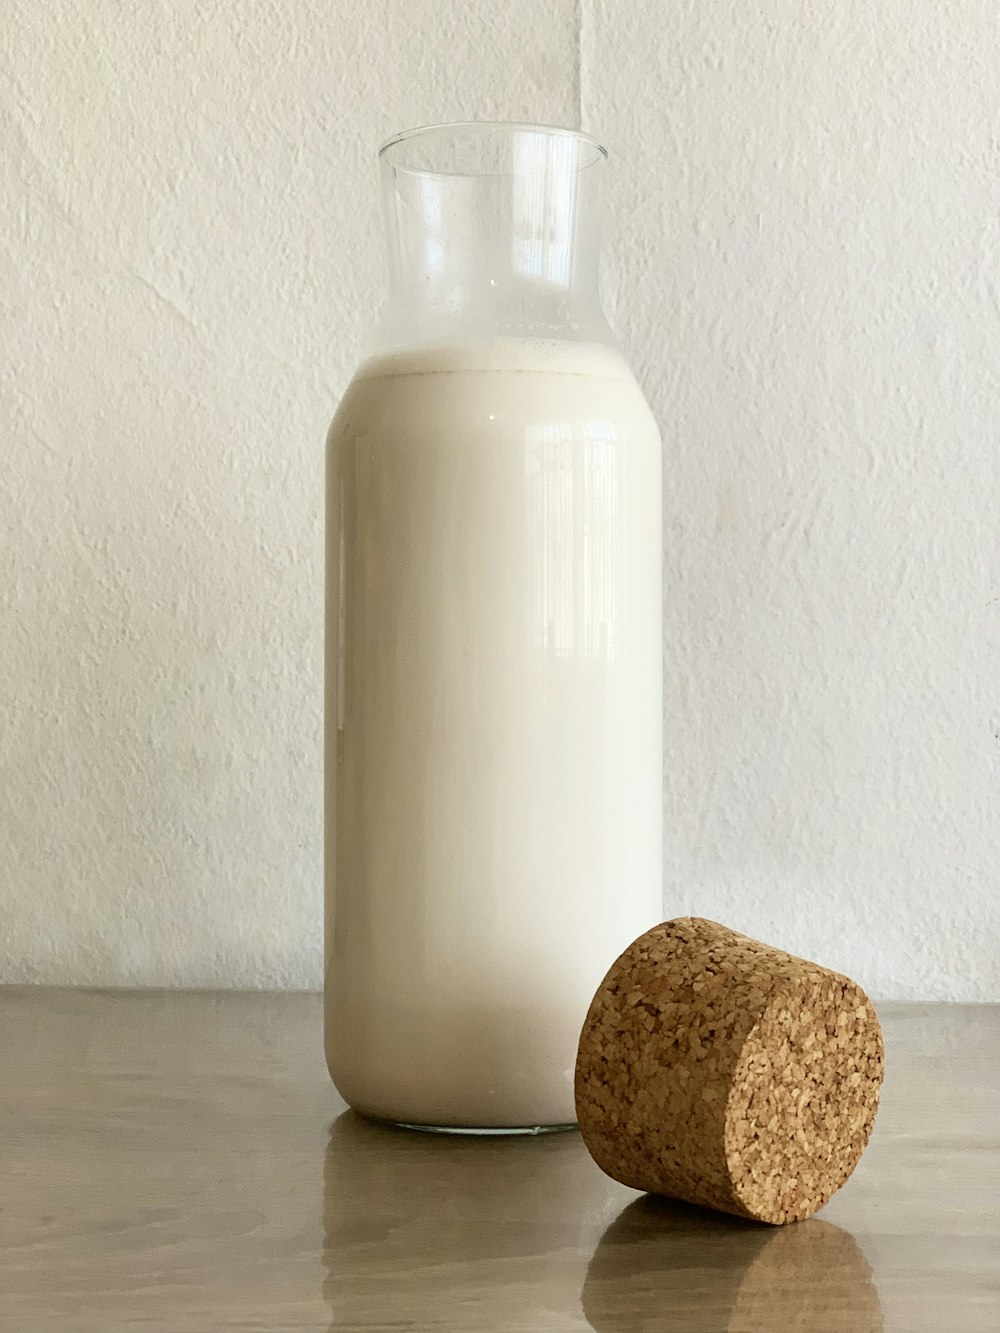 a bottle of milk and a cork on a table